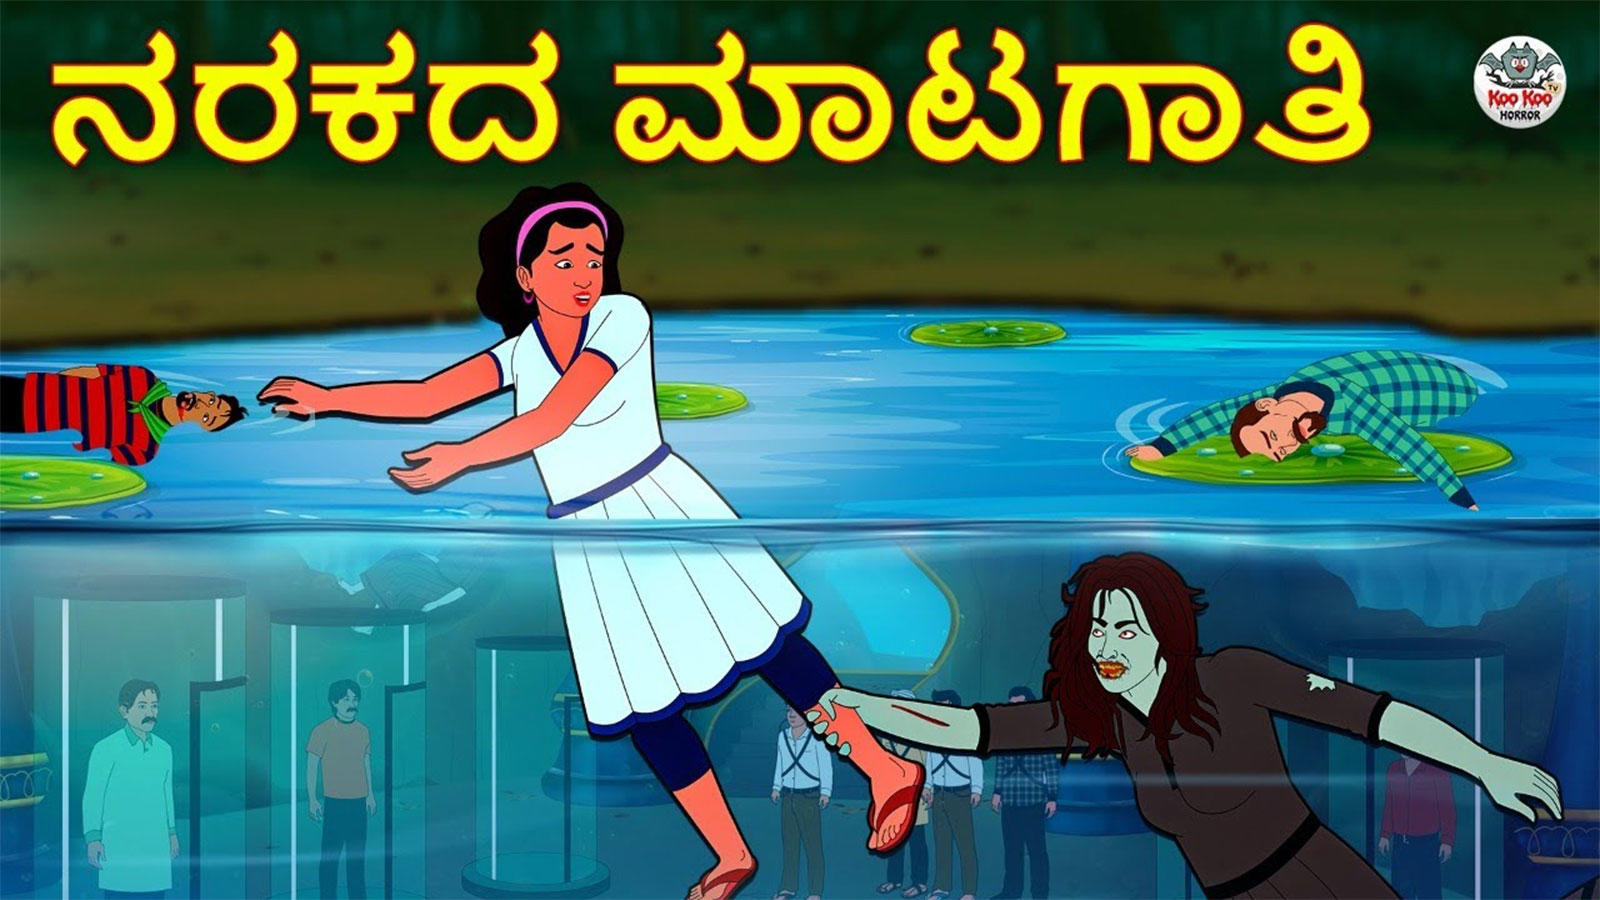 Watch Latest Children Kannada Nursery Story 'ನರಕದ ಮಾಟಗಾತಿ - Witch Of The  Hell' for Kids - Check Out Children's Nursery Stories, Baby Songs, Fairy  Tales In Kannada | Entertainment - Times of India Videos